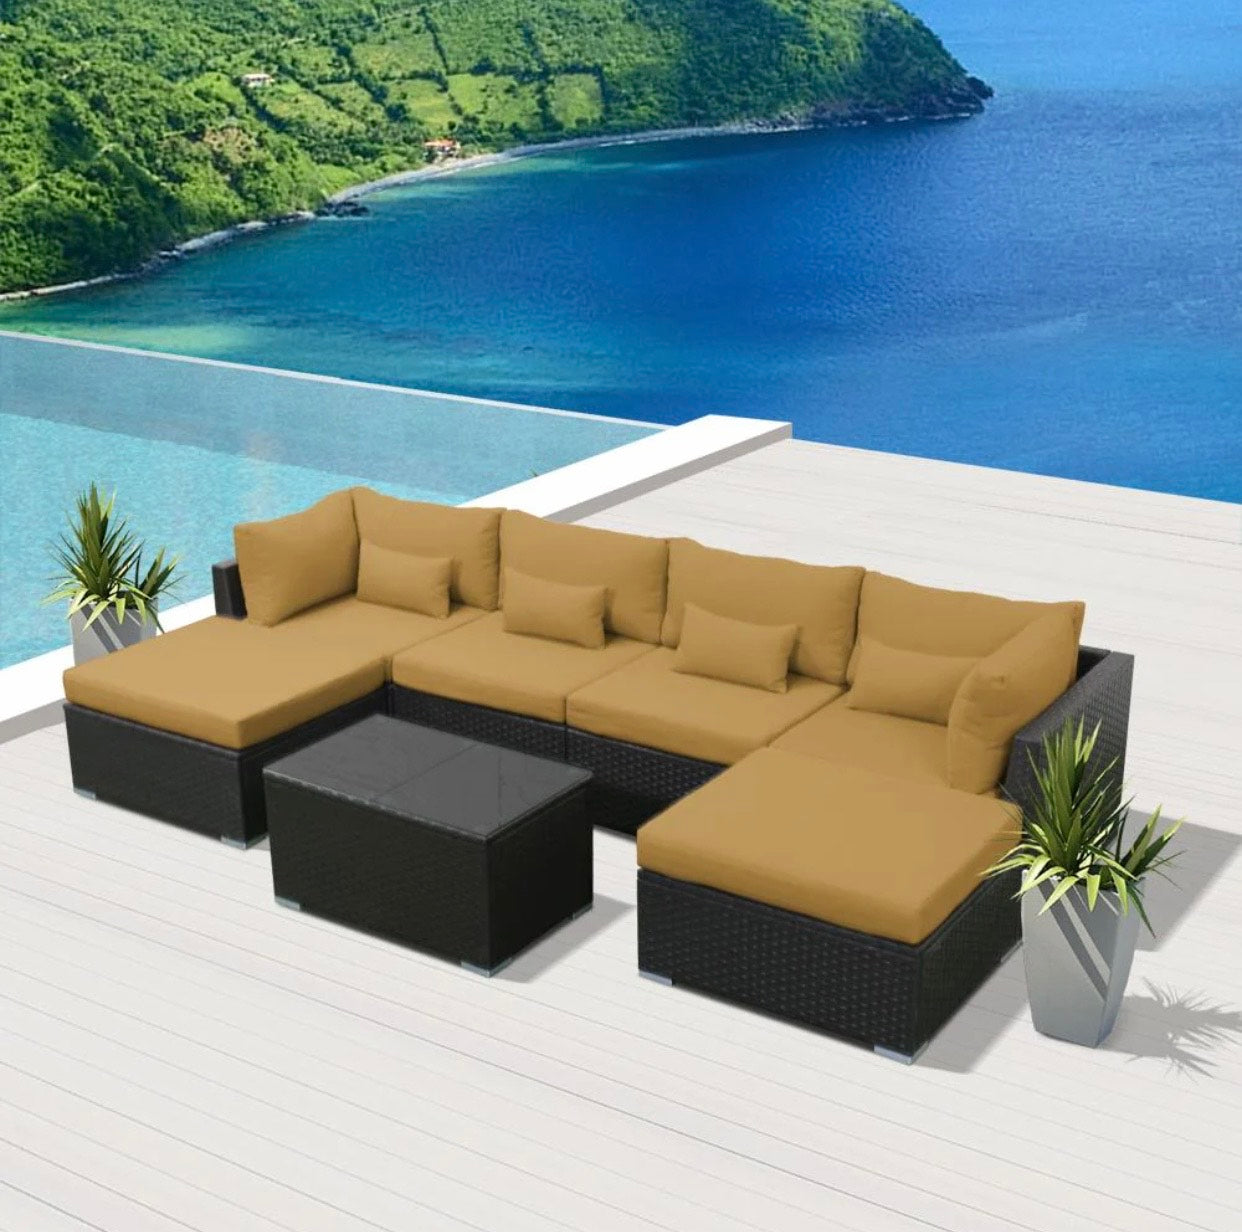 Beige Dark Brown 7C Replacement Cushion Covers Outdoor Patio Furniture Set (Without Foam Insis)